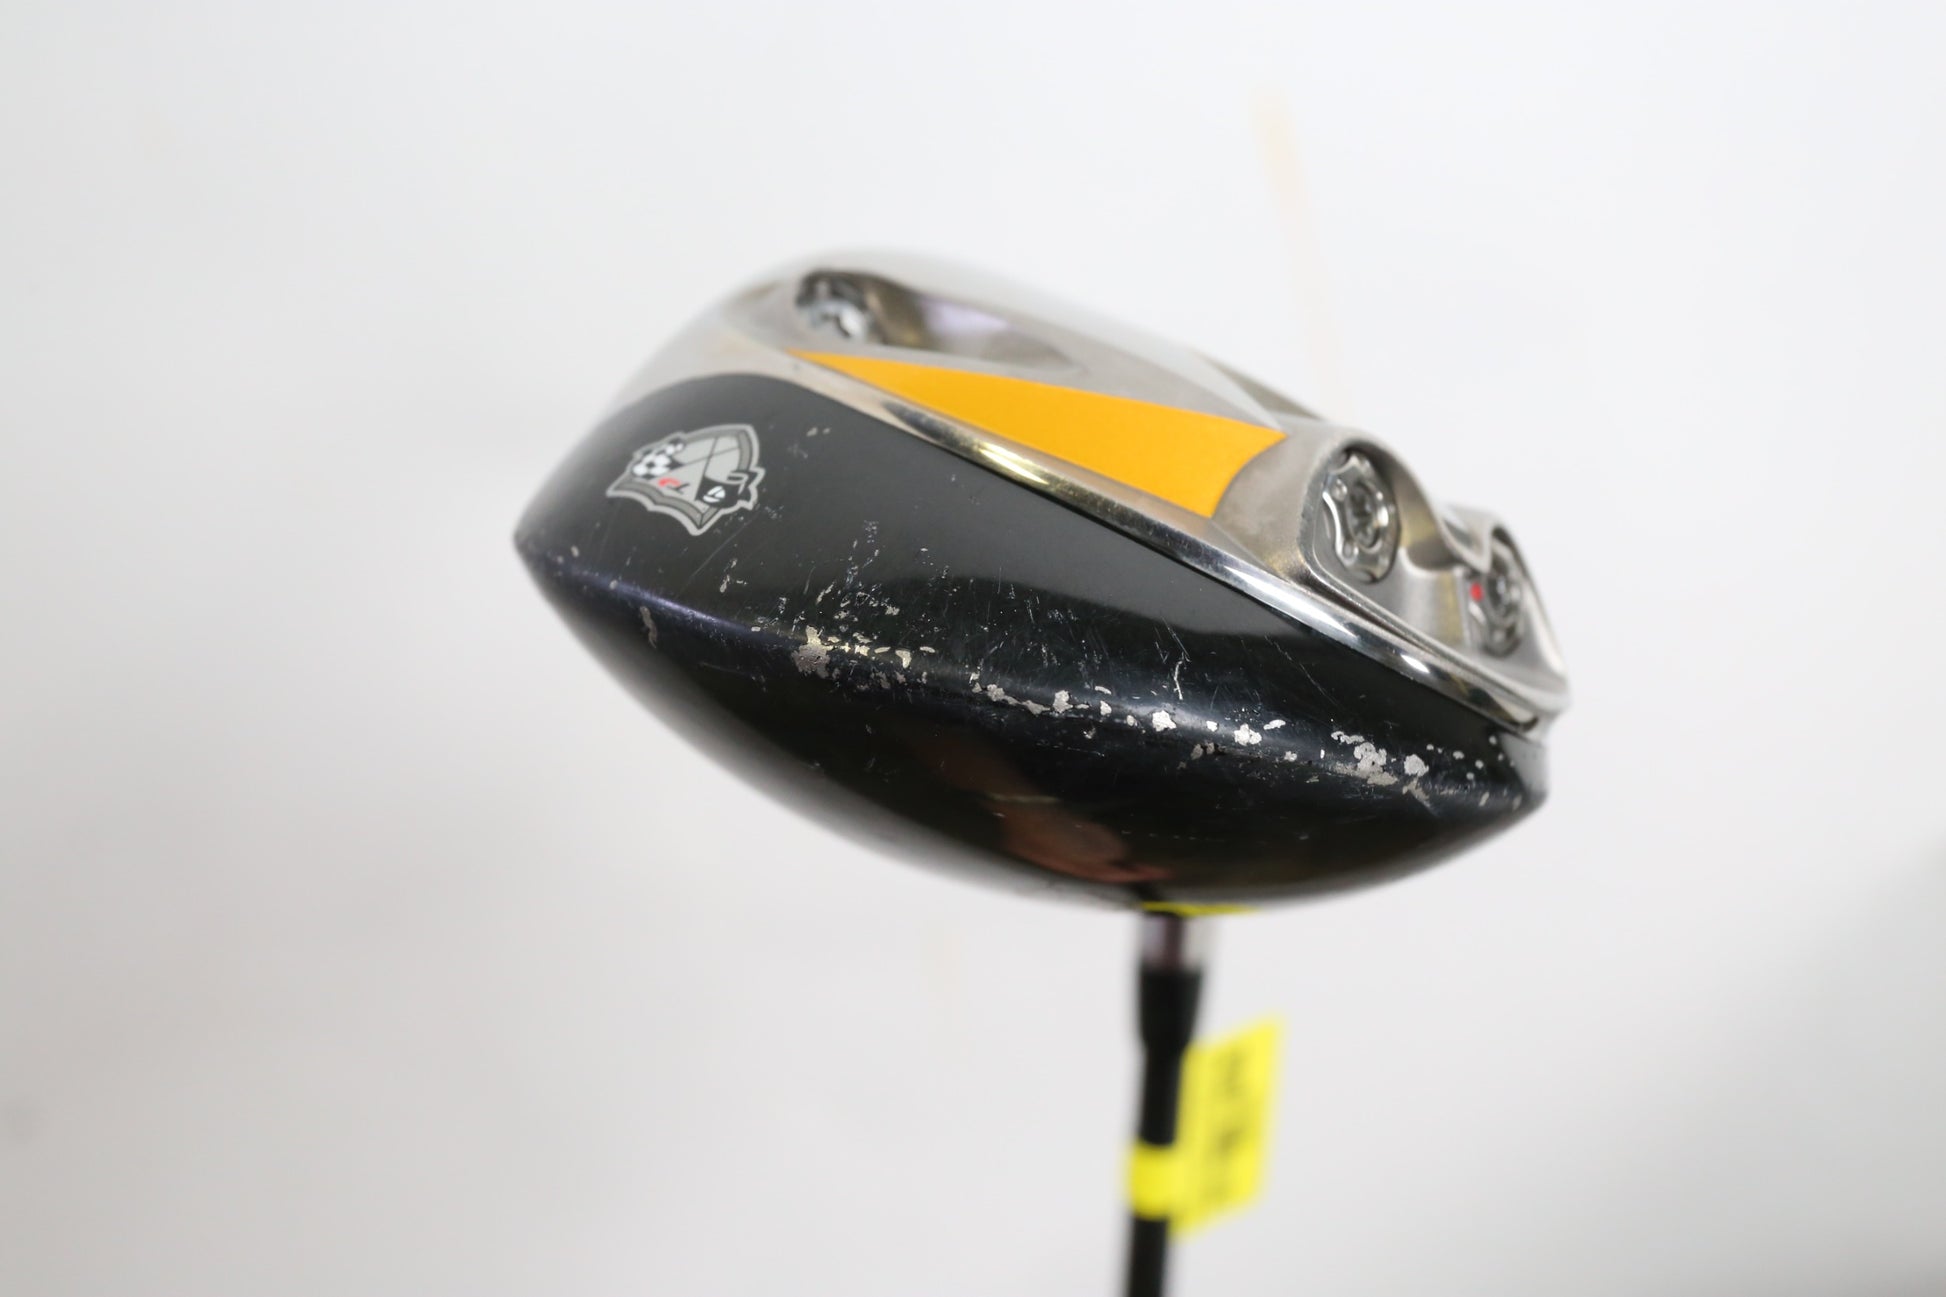 Used TaylorMade r7 425 Driver - Right-Handed - 8.5 Degrees - Regular Flex-Next Round